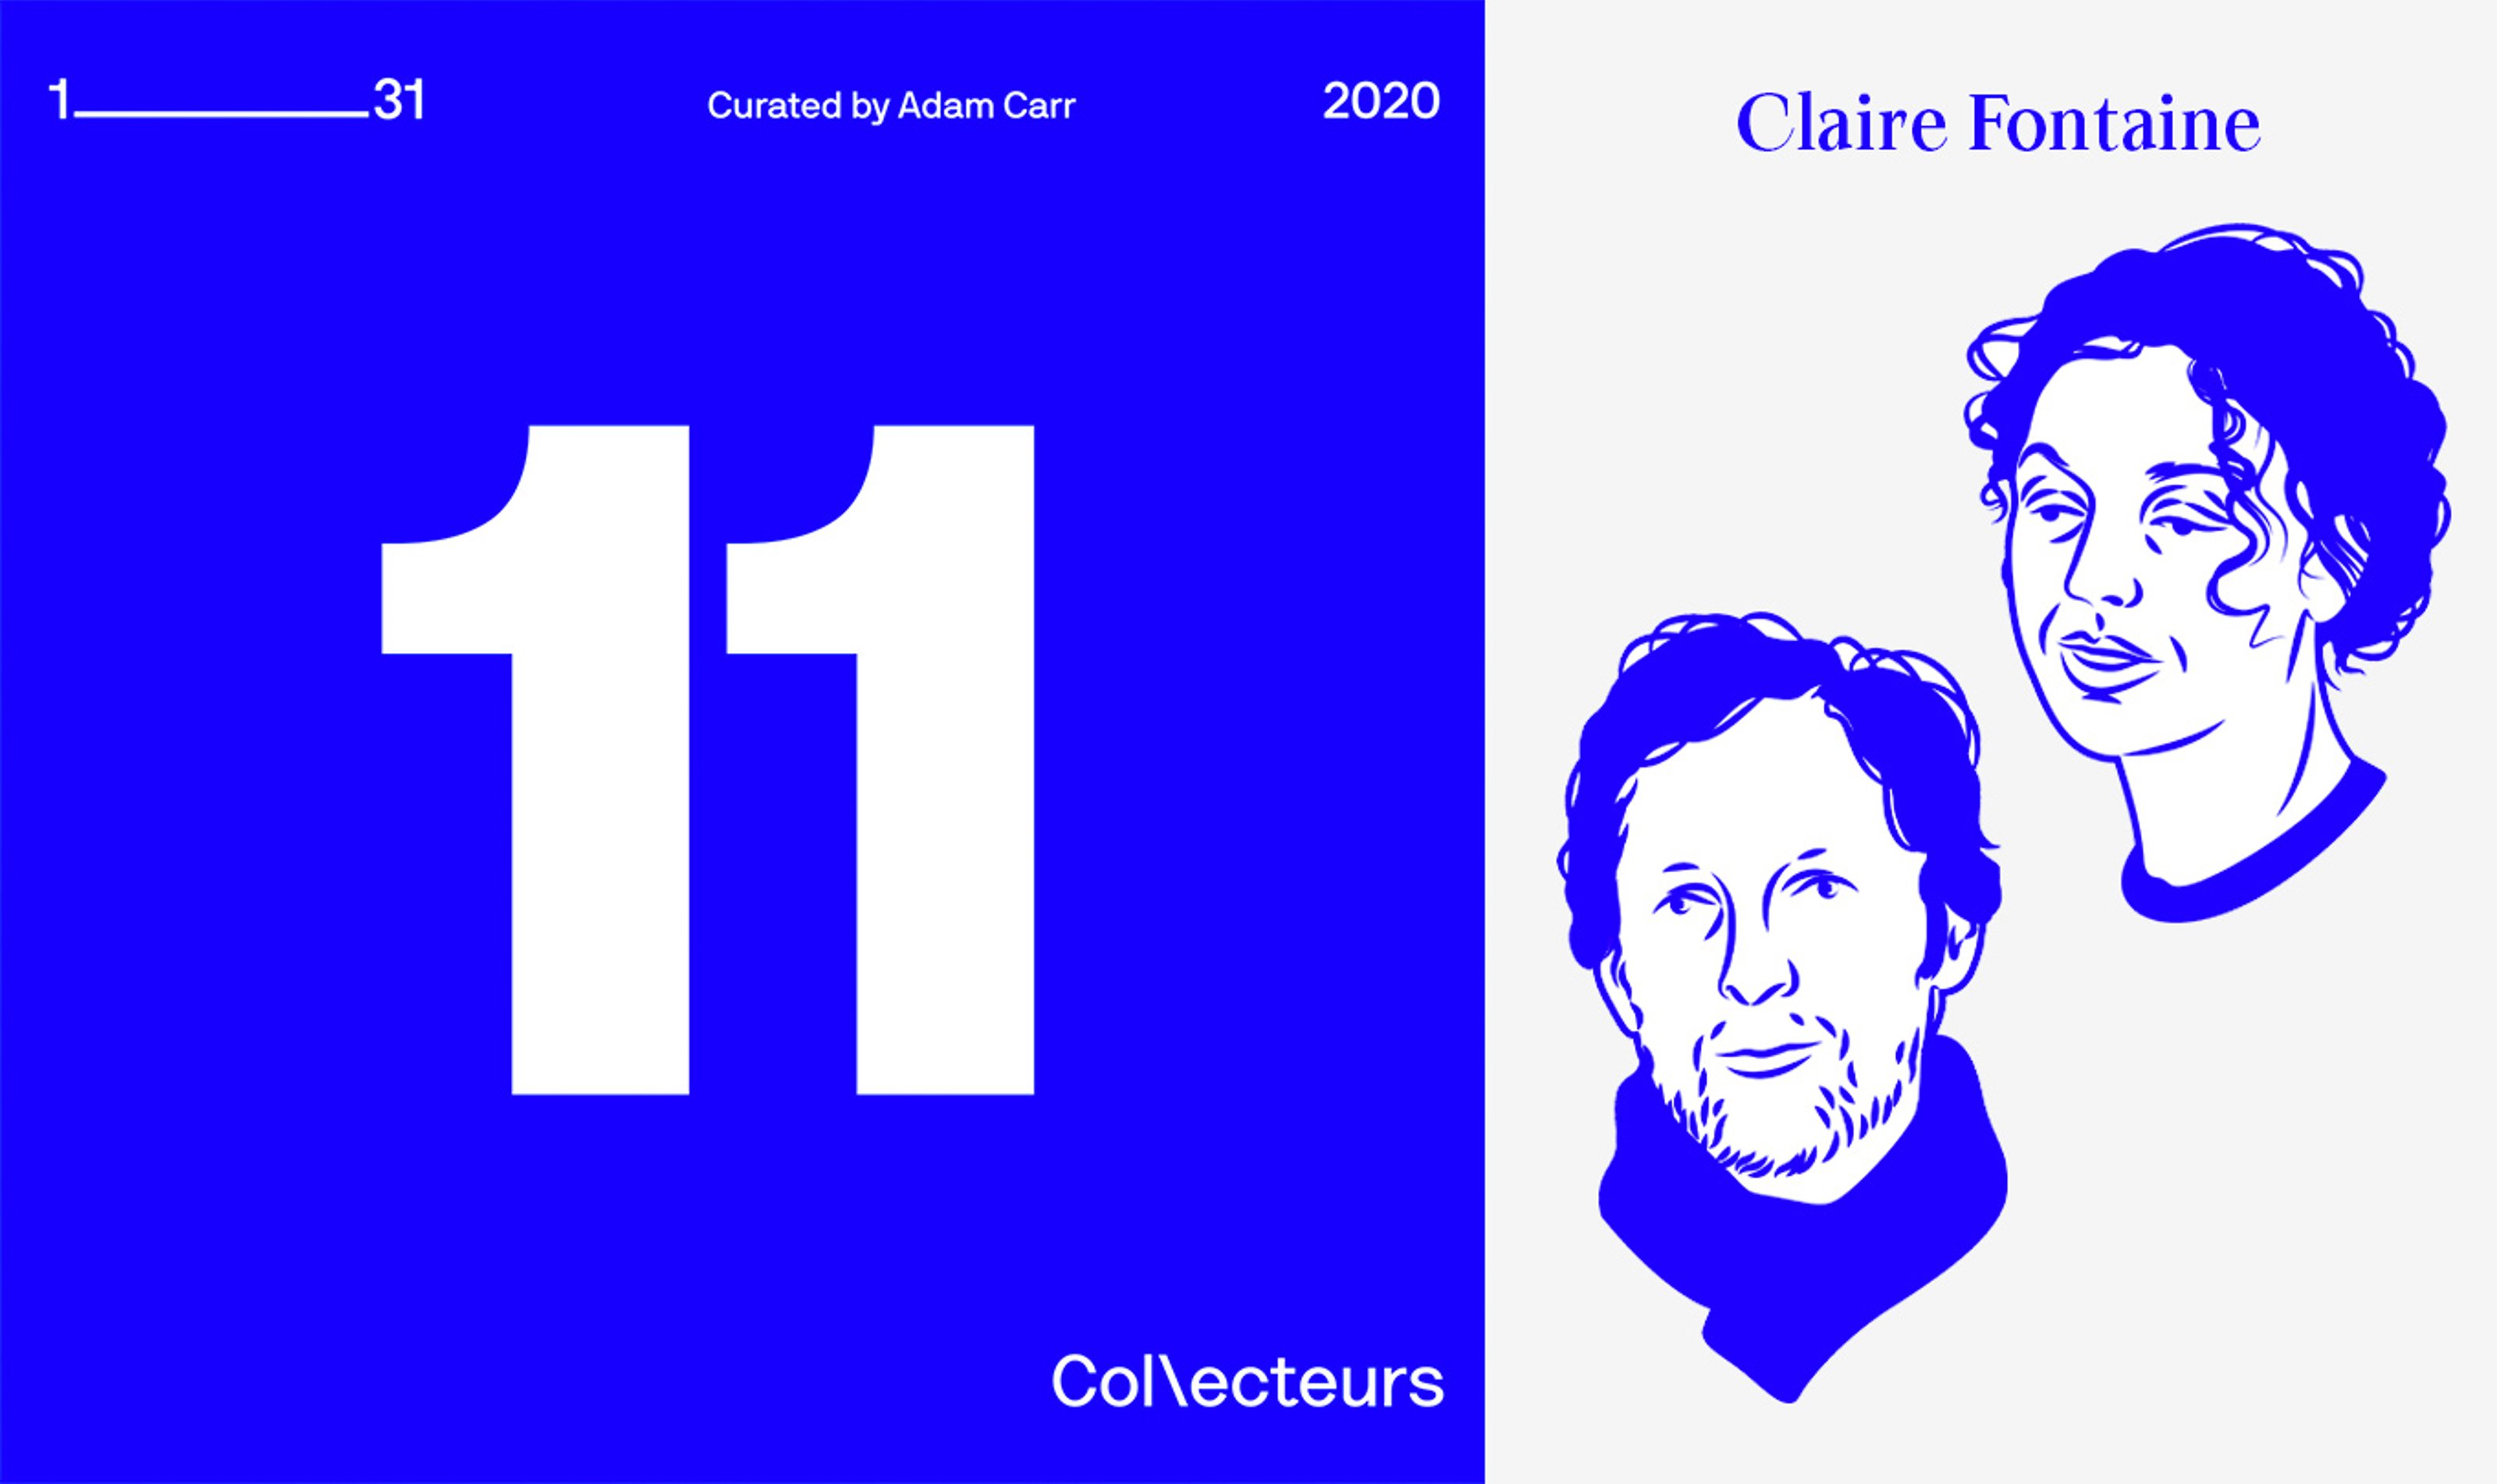 number 11, illustrated portraits of the two artists behind the artist collective, Claire Fontaine